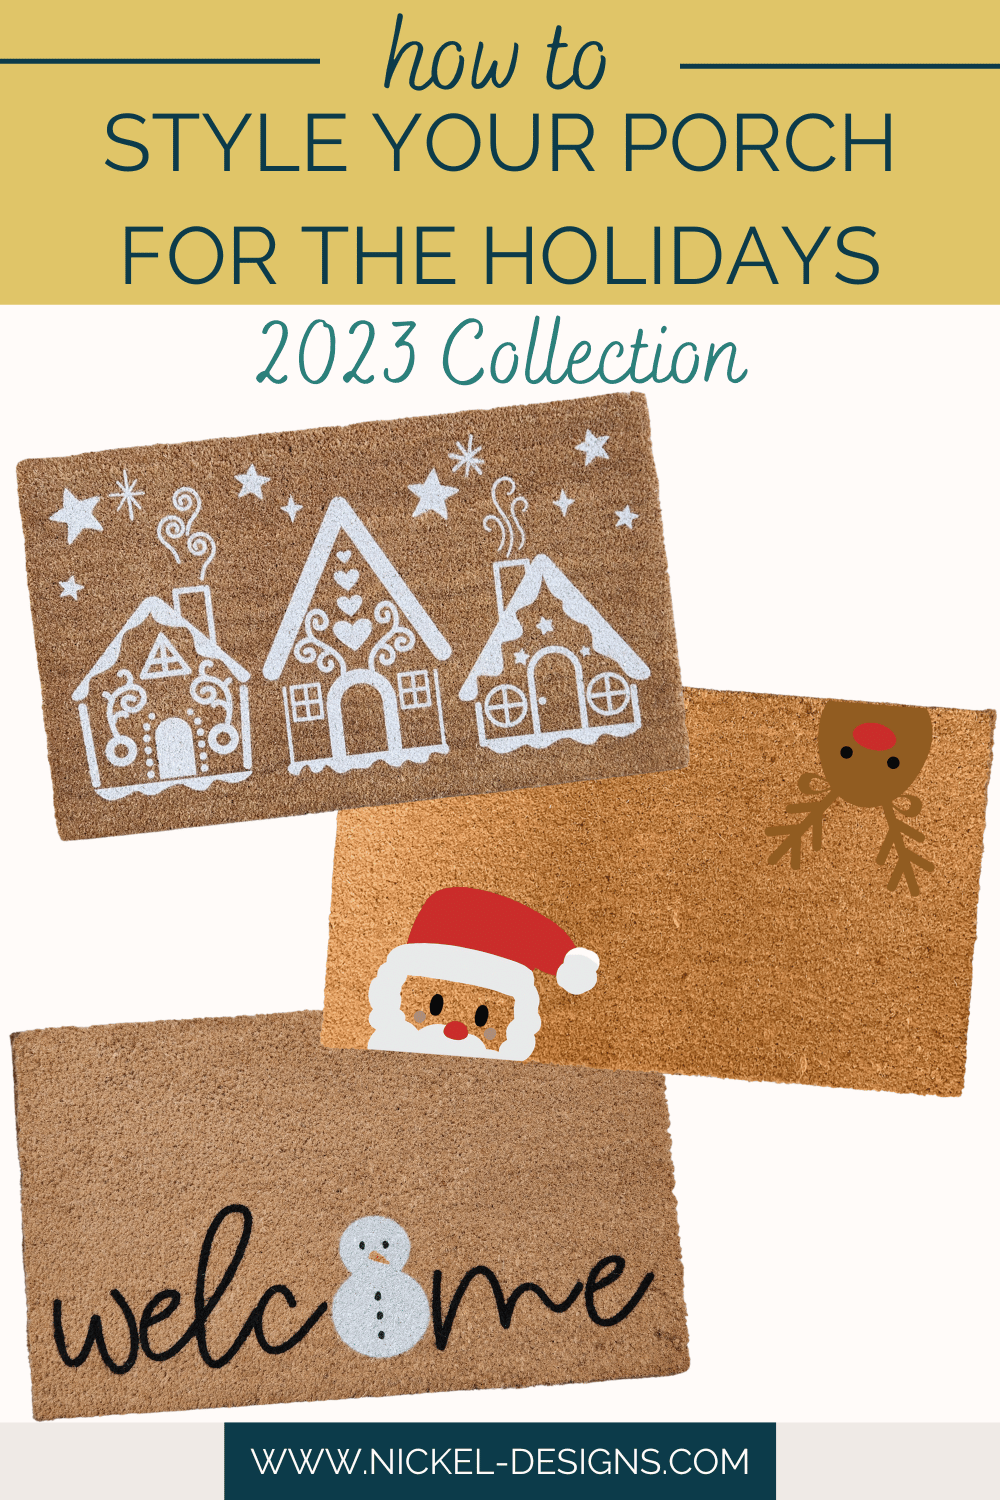 Welcoming the Season: Introducing Our Newest Collection of Winter Doormats